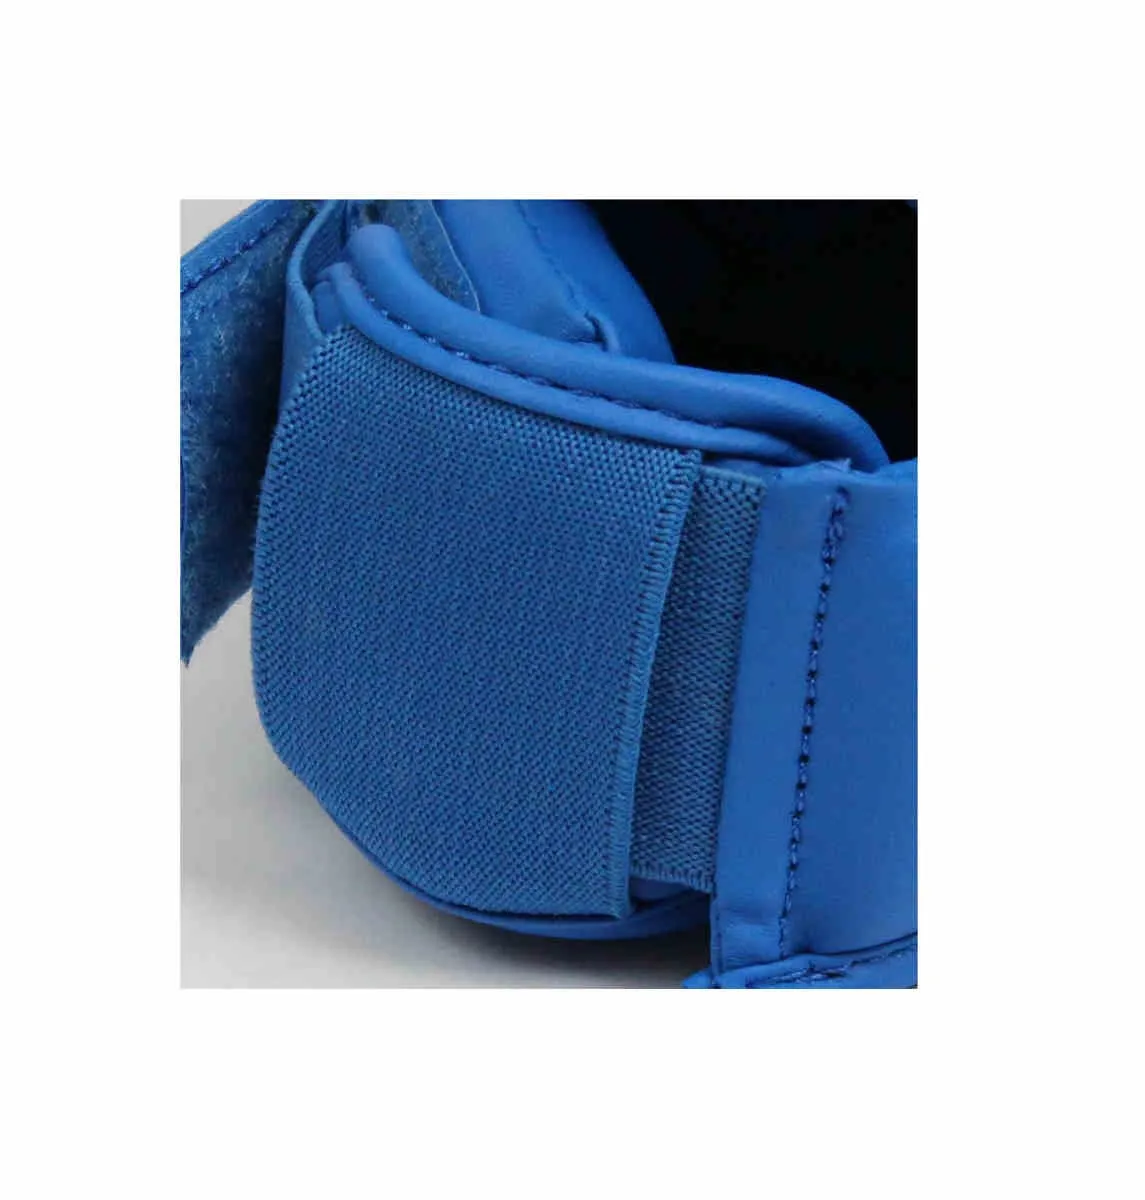 Shin guard instep protection blue